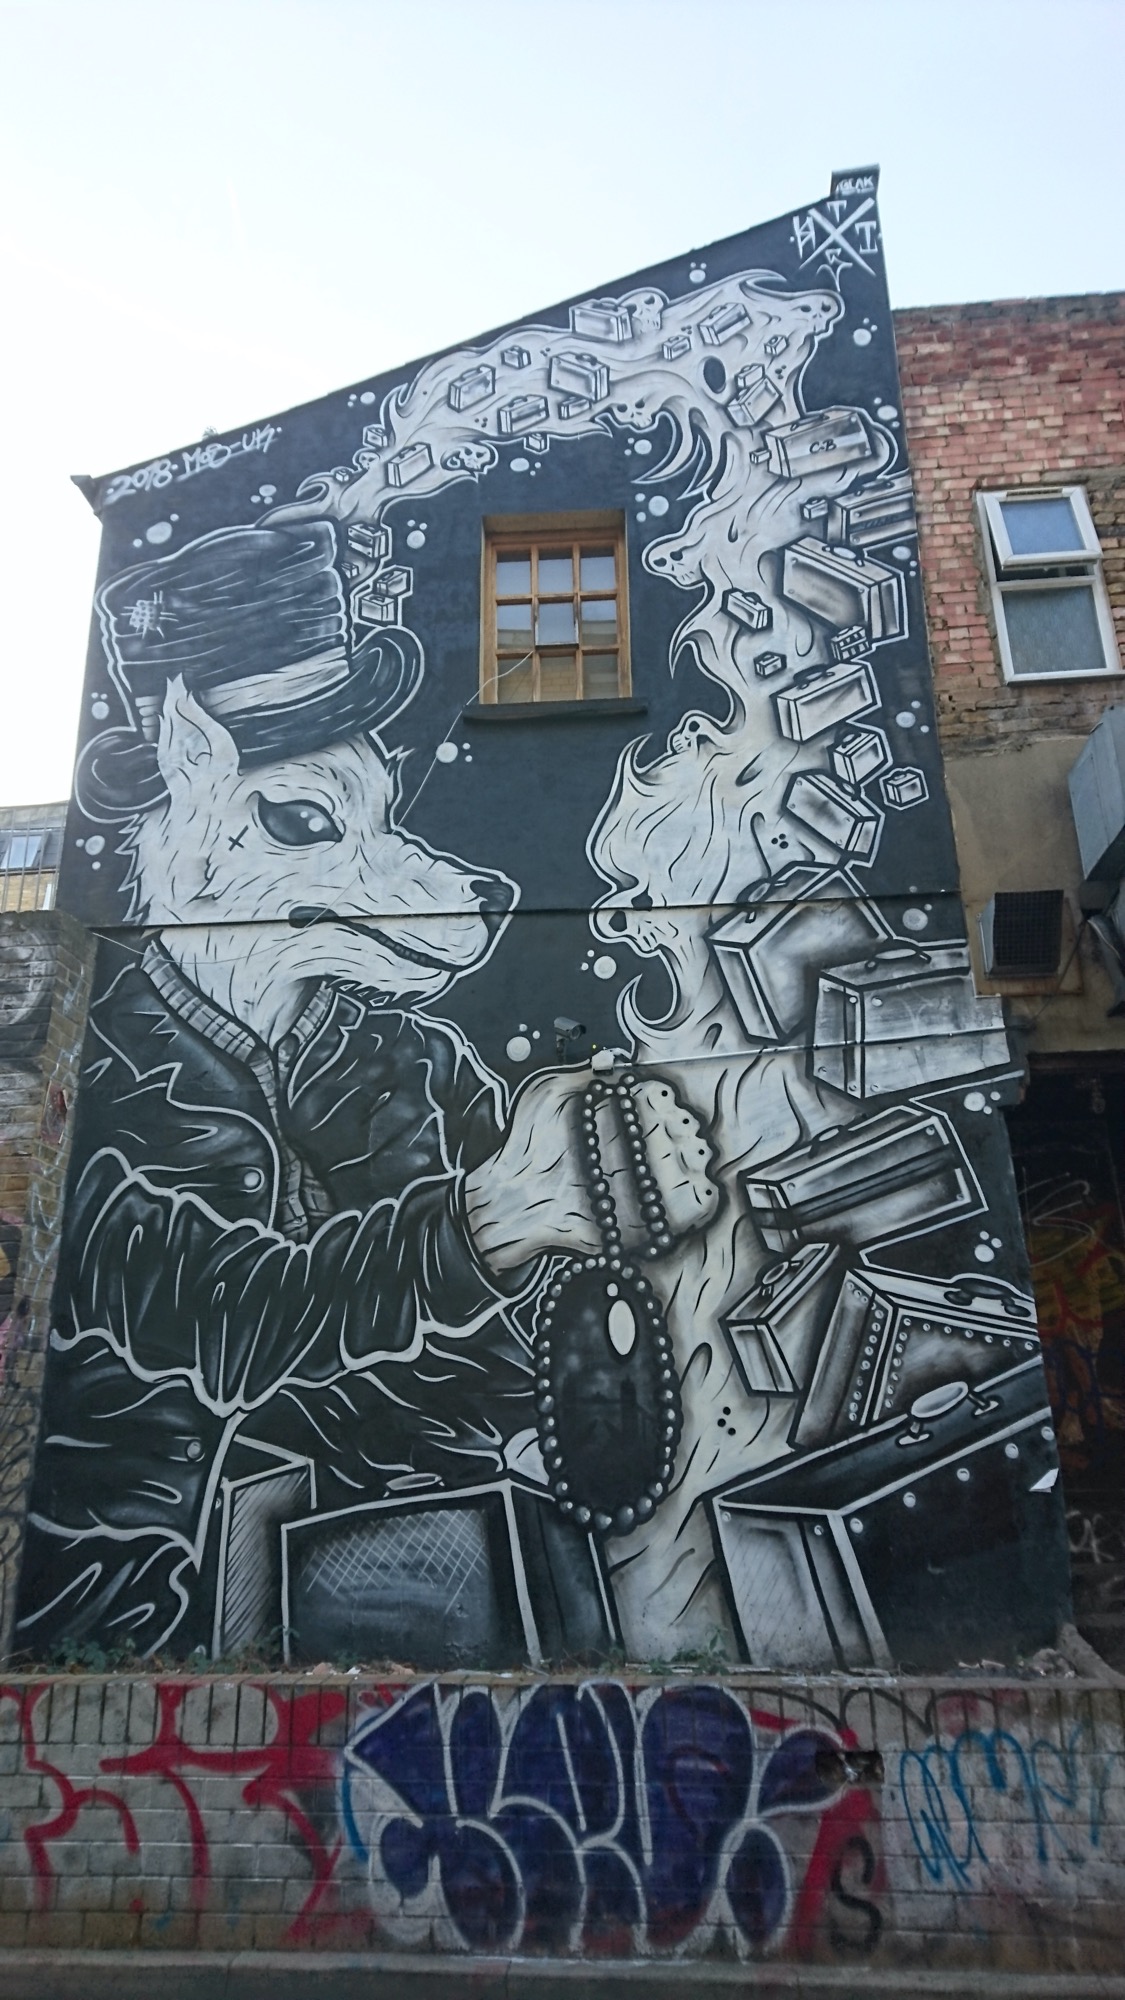 Graffiti 759 The Dog and Money captured by Chloé_rhe in London United Kingdom